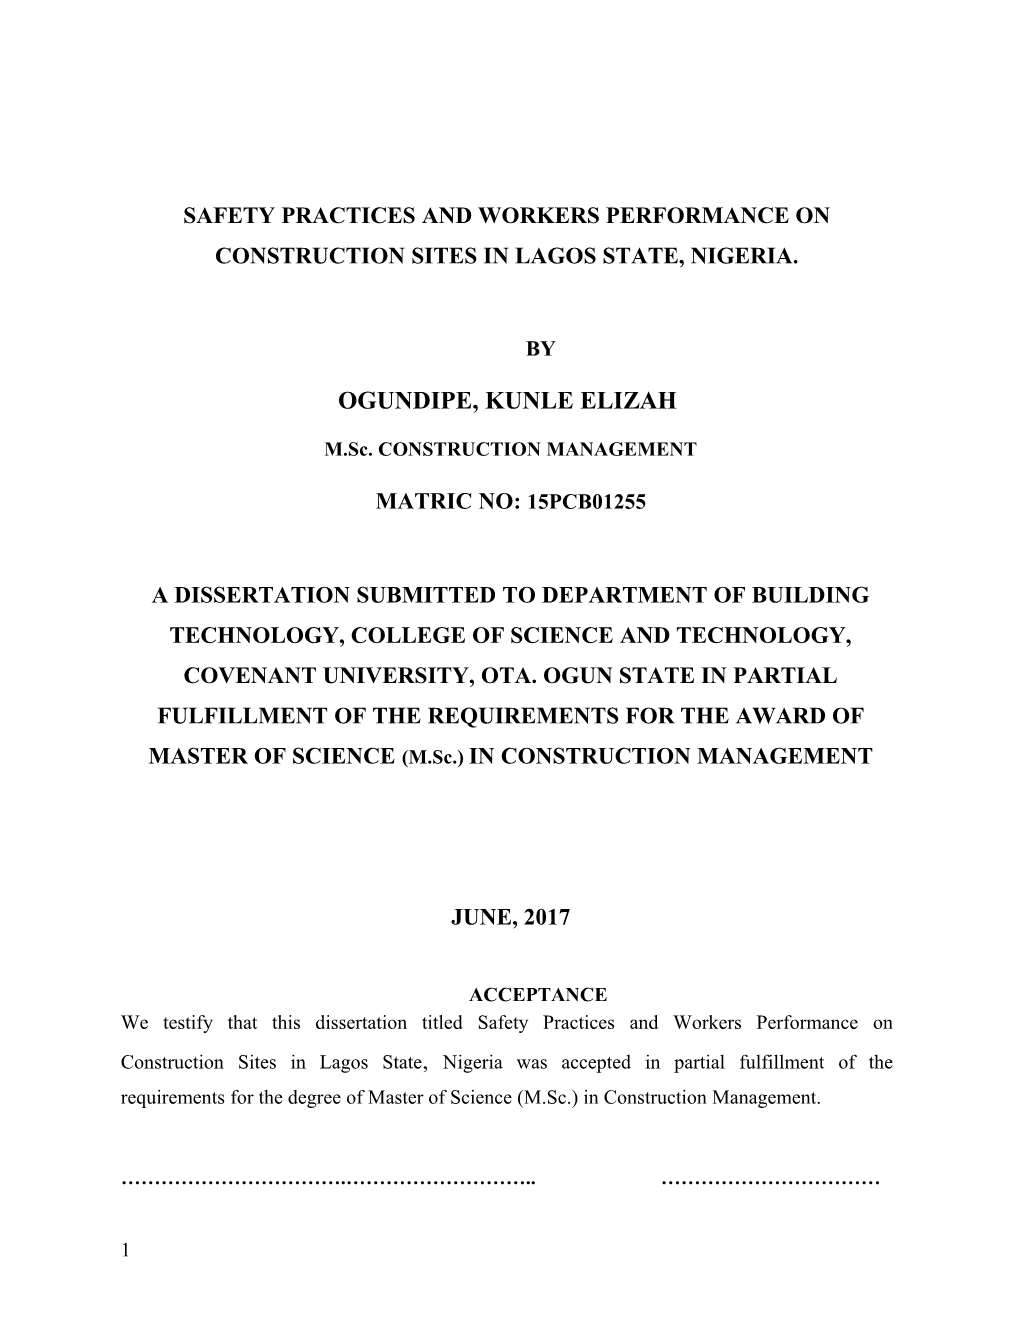 Safety Practices and Workers Performance on Construction Sites in Lagos State, Nigeria